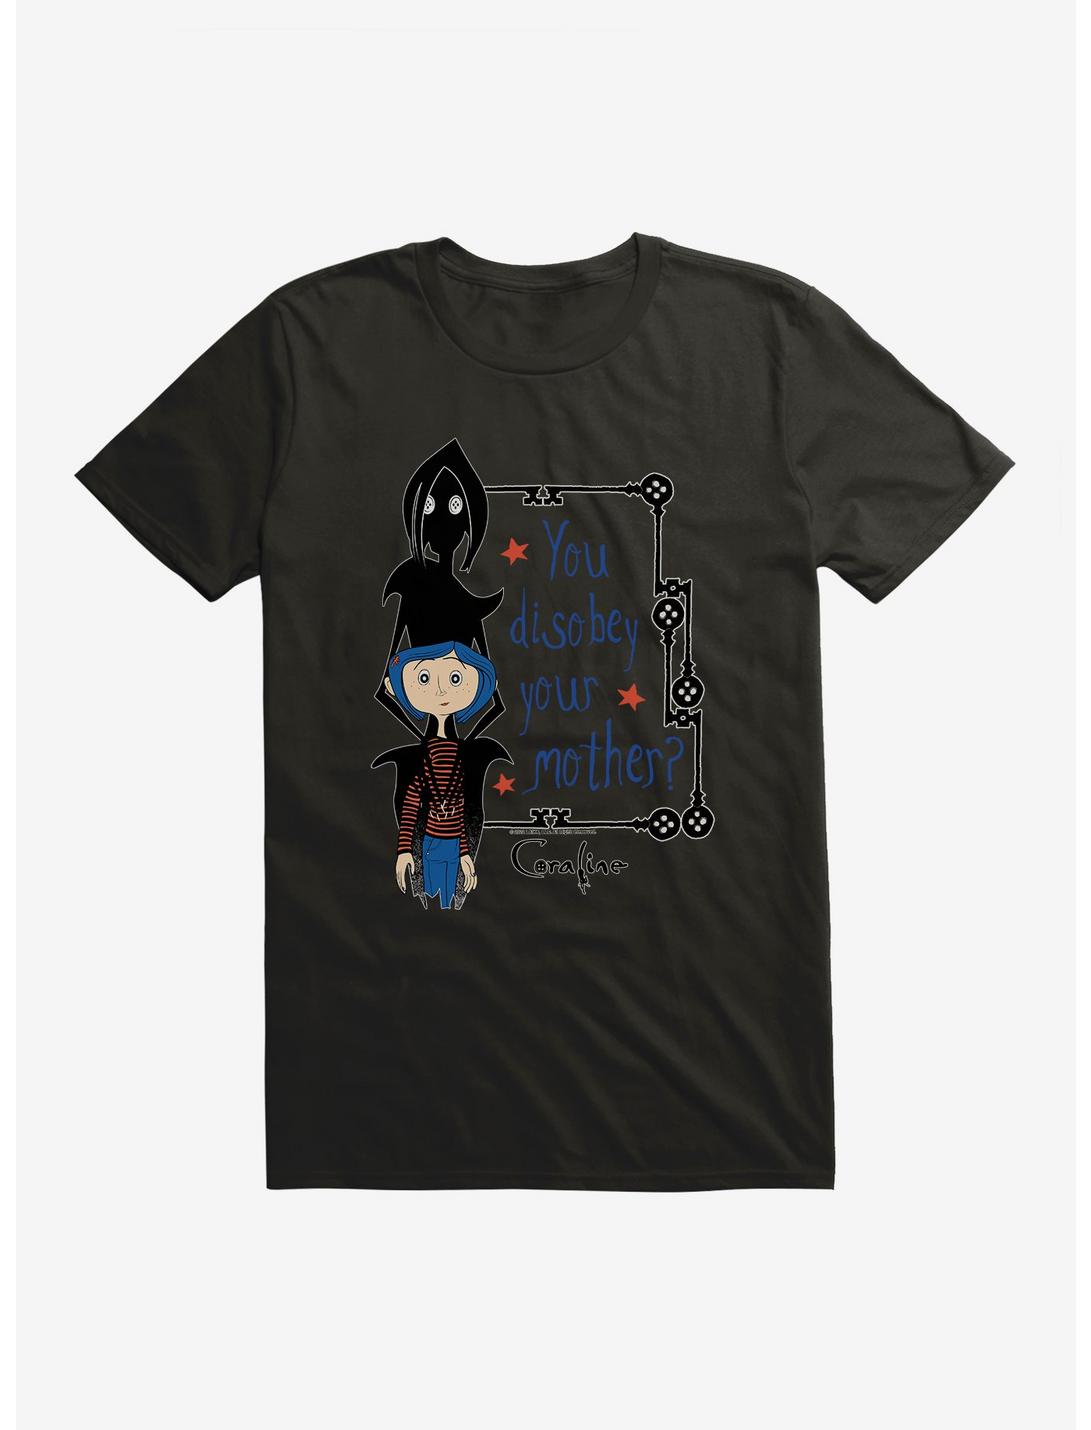 Coraline Disobey Mother T-Shirt, , hi-res